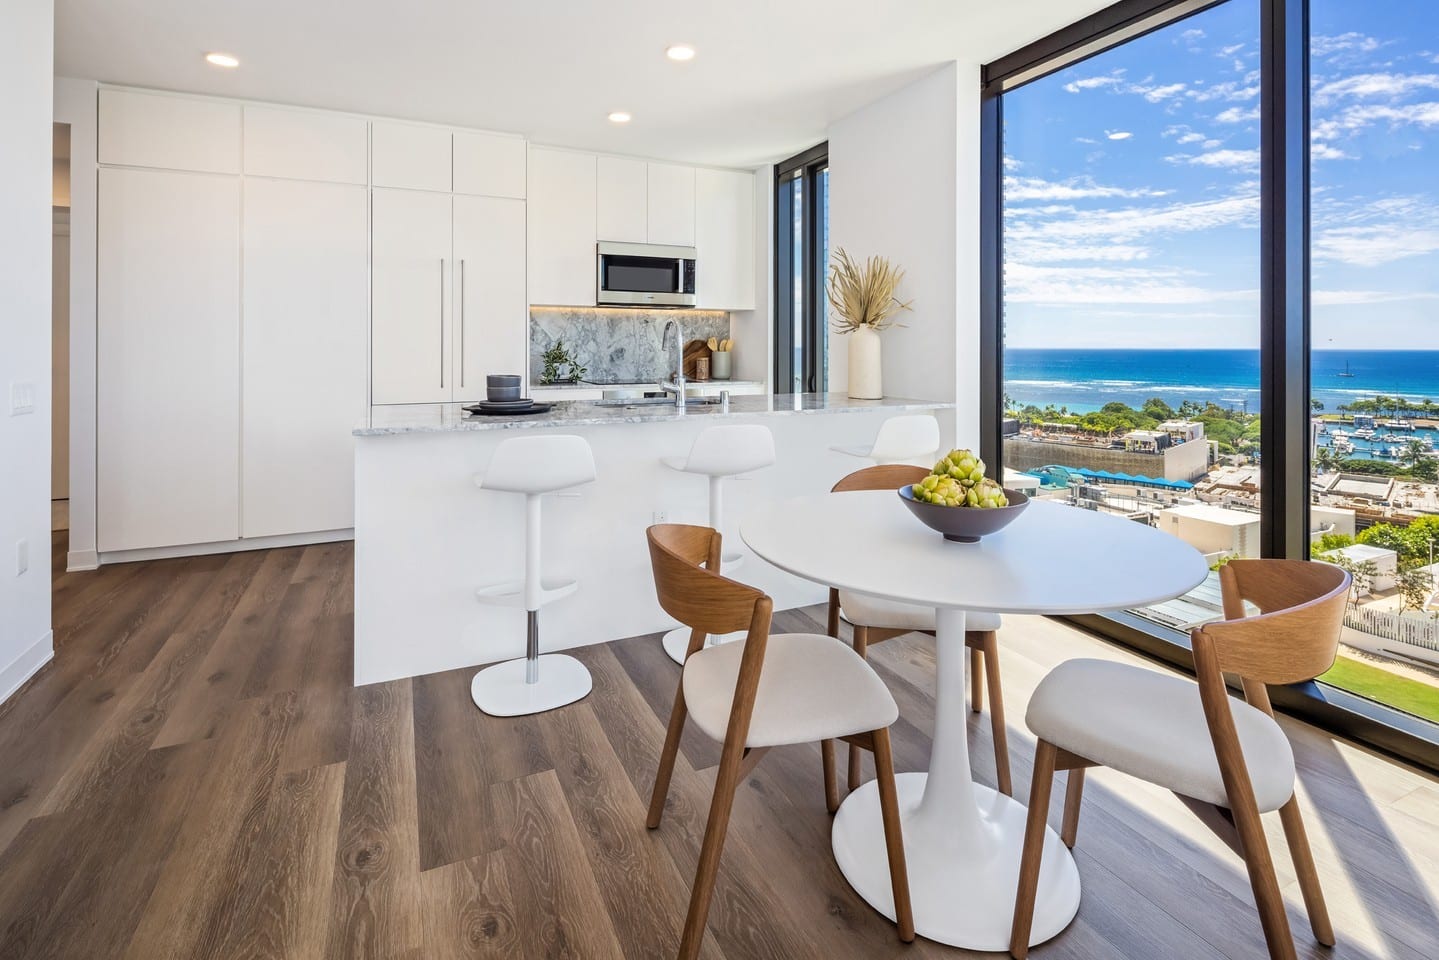 Surrounded by panoramic views of the Koʻolau Mountains and the sparkling Pacific Ocean, the beauty of Hawai‘i can be seen and felt throughout your home at ‘A‘ali‘i. Learn more about these modern move-in ready residences by visiting our website at www.aaliiwardvillage.com.